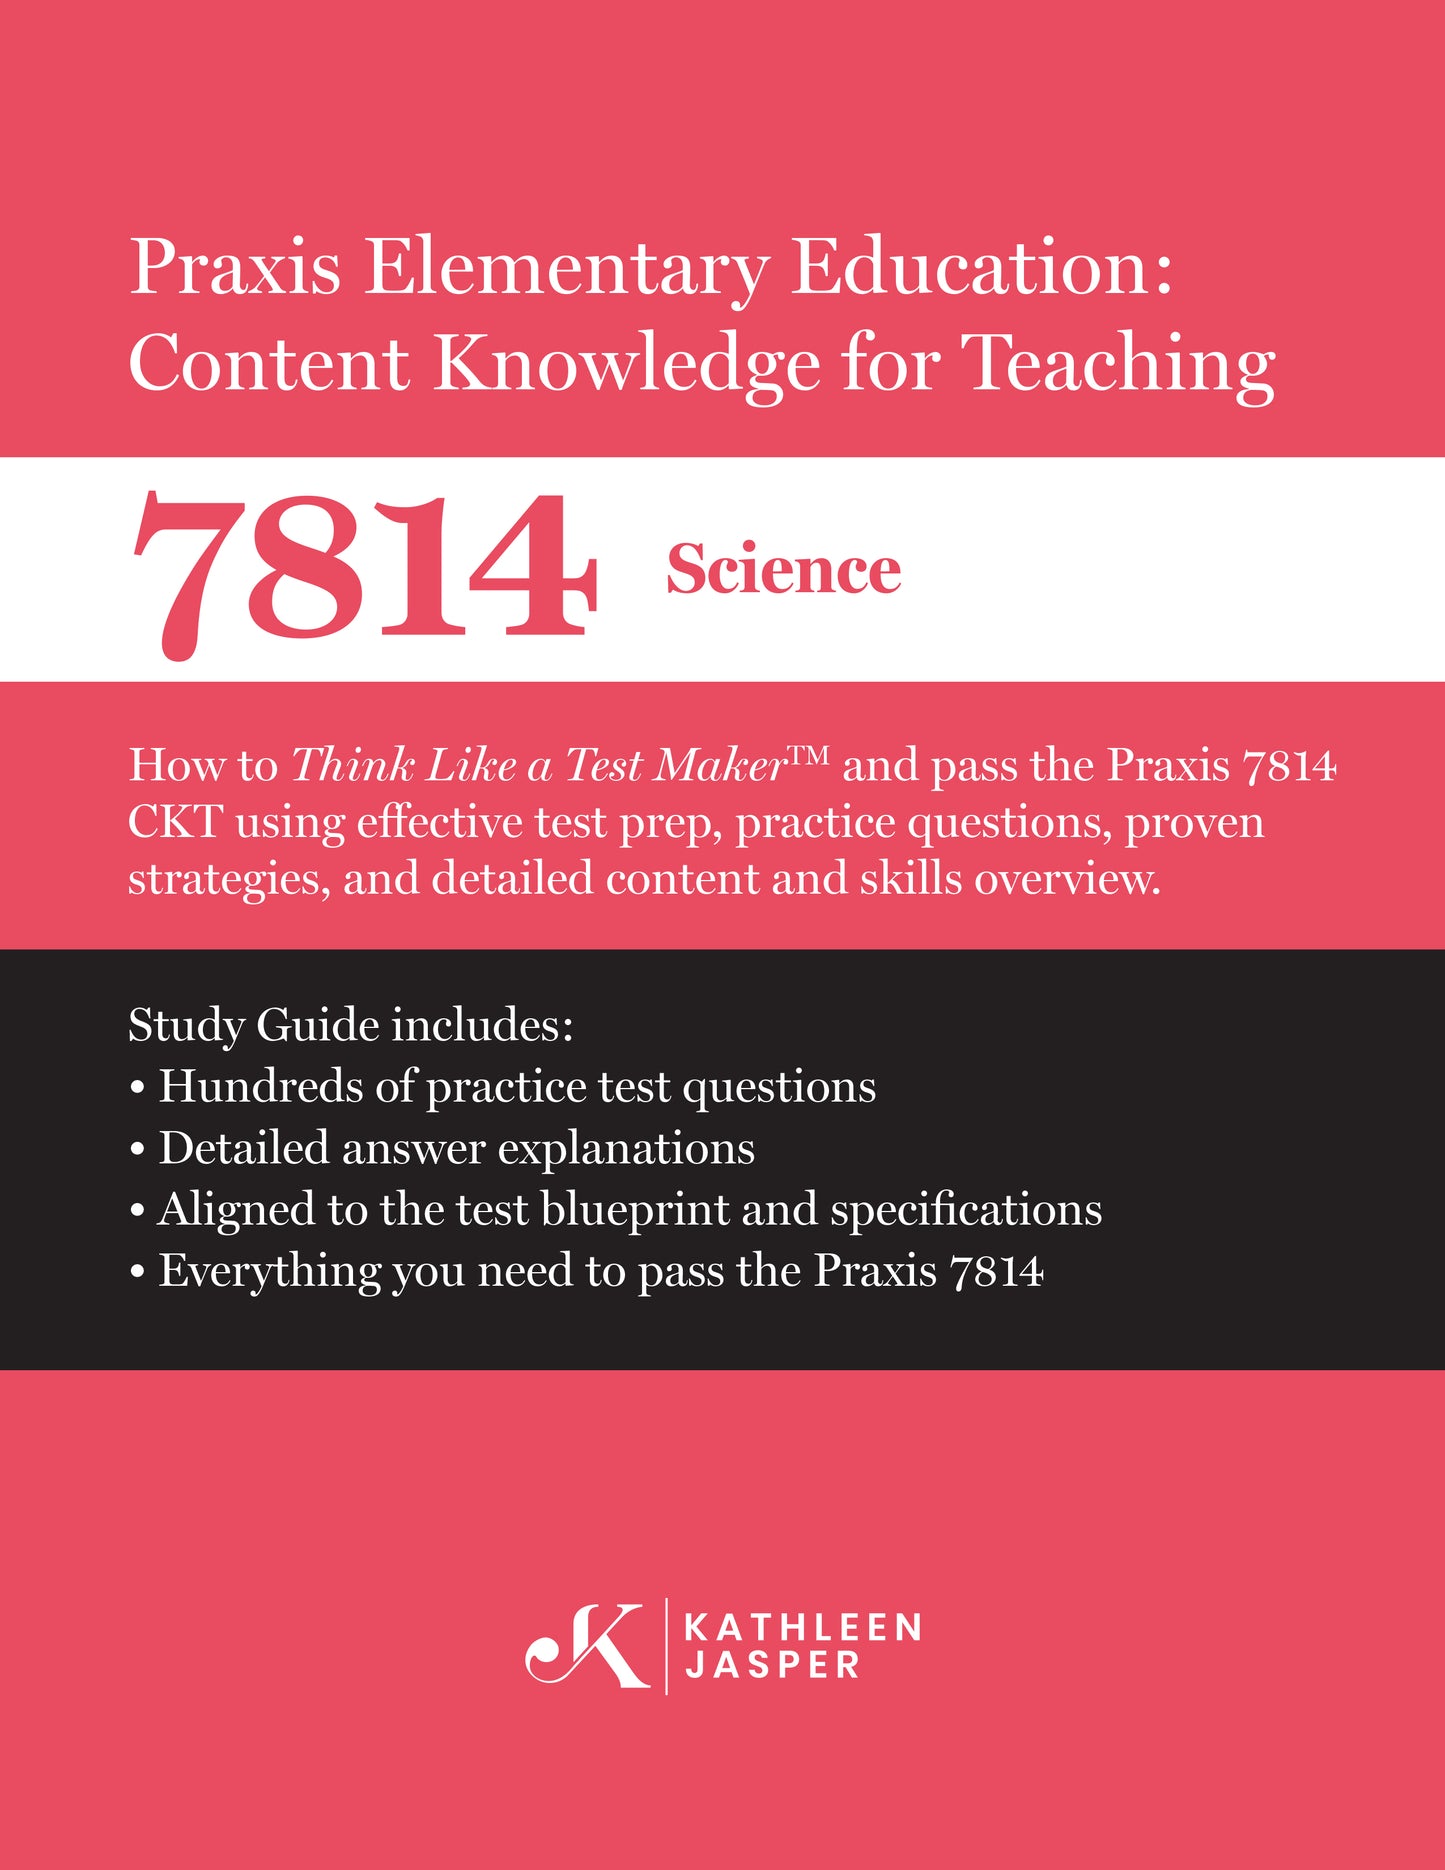 Praxis II Elementary Education Content Knowledge for Teaching (CKT) 7814 - Science